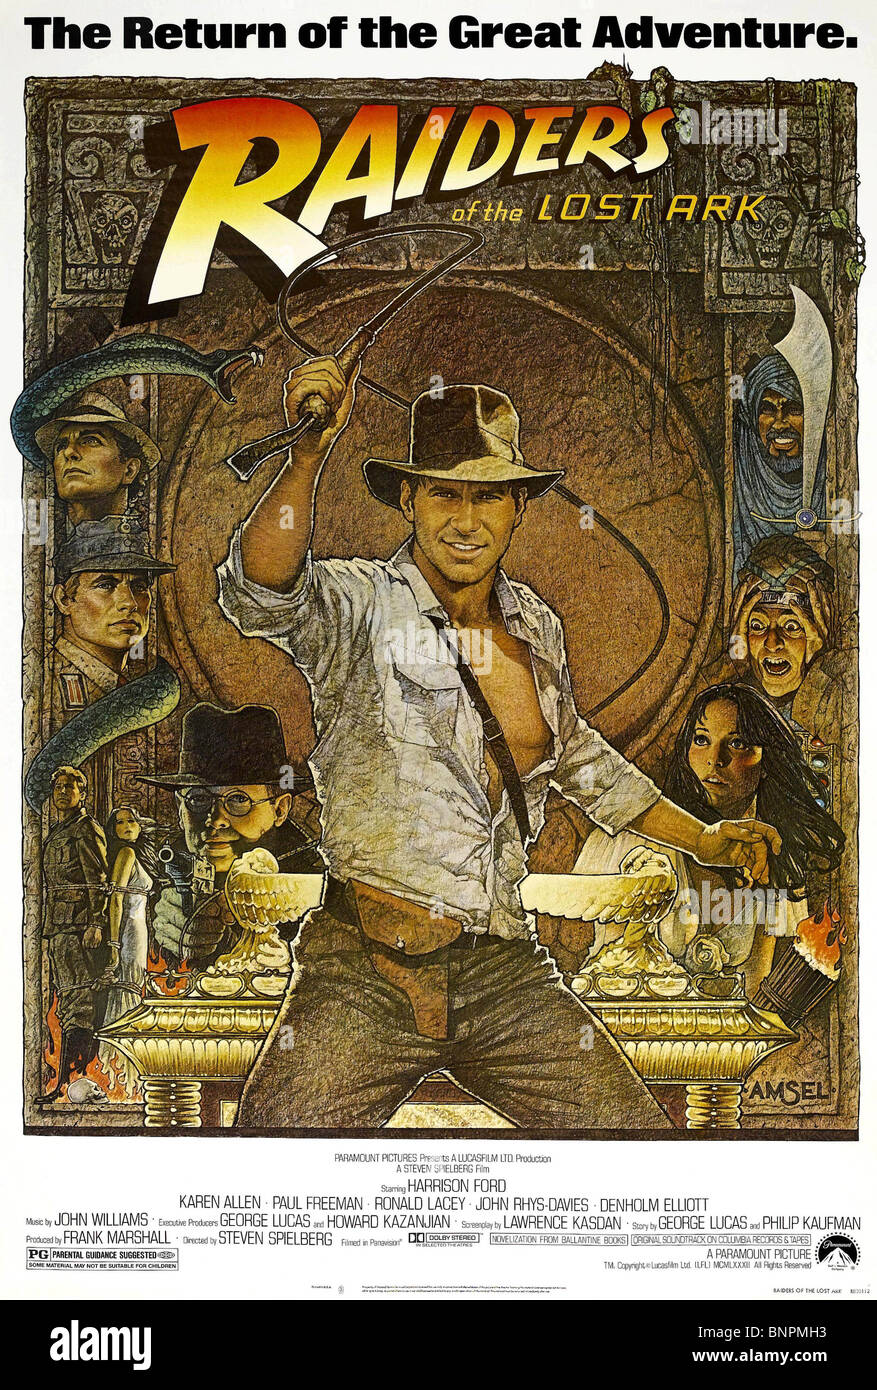 INDIANA JONES POSTER INDIANA JONES AND THE RAIDERS OF THE LOST ARK ...